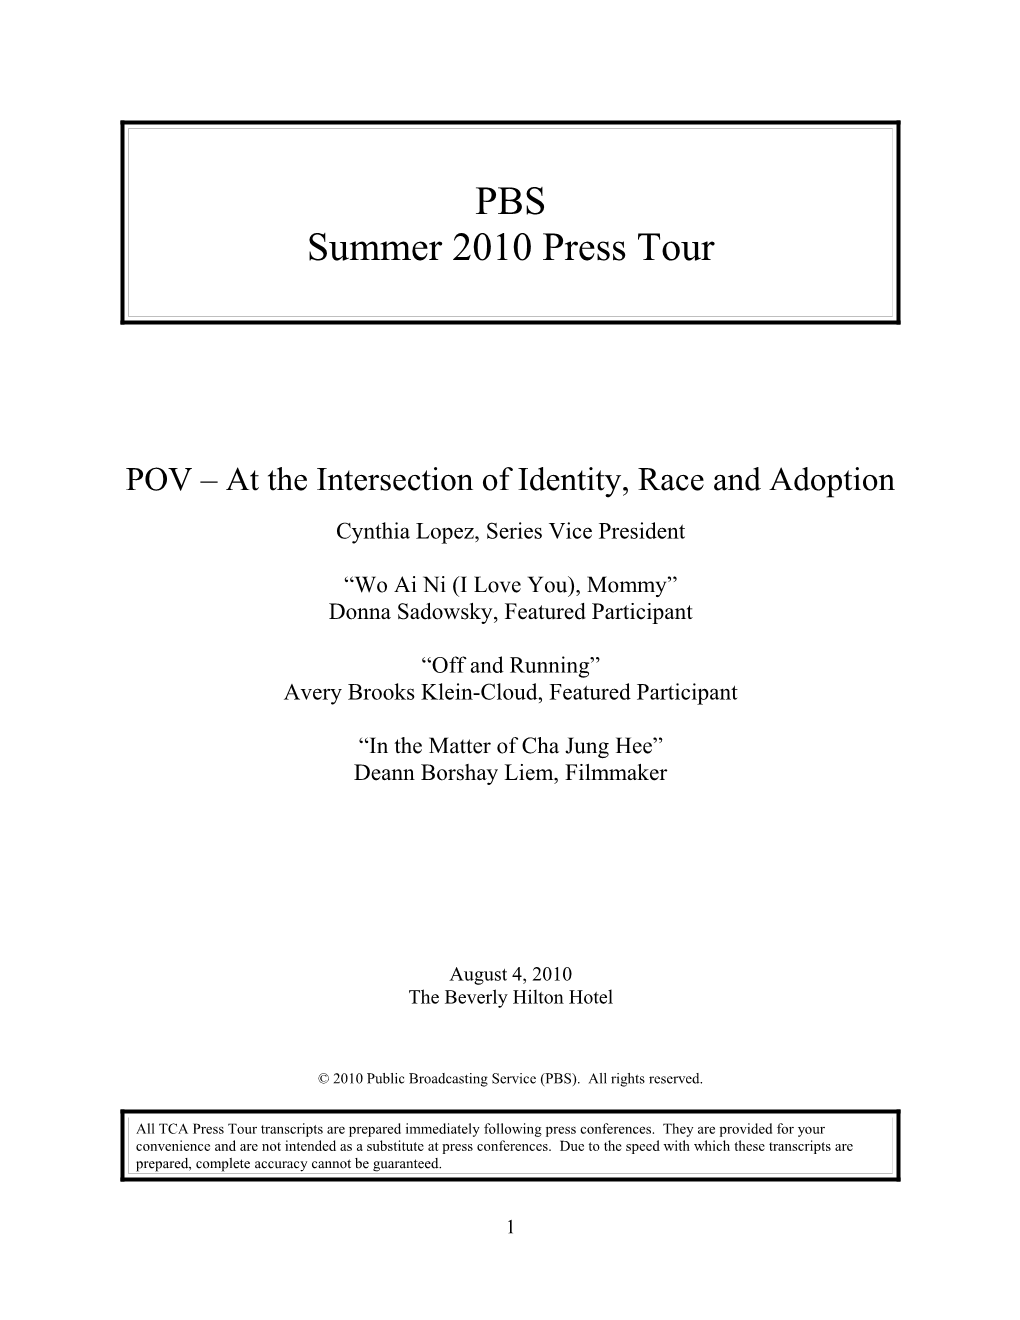 POV at the Intersection of Identity, Race and Adoption